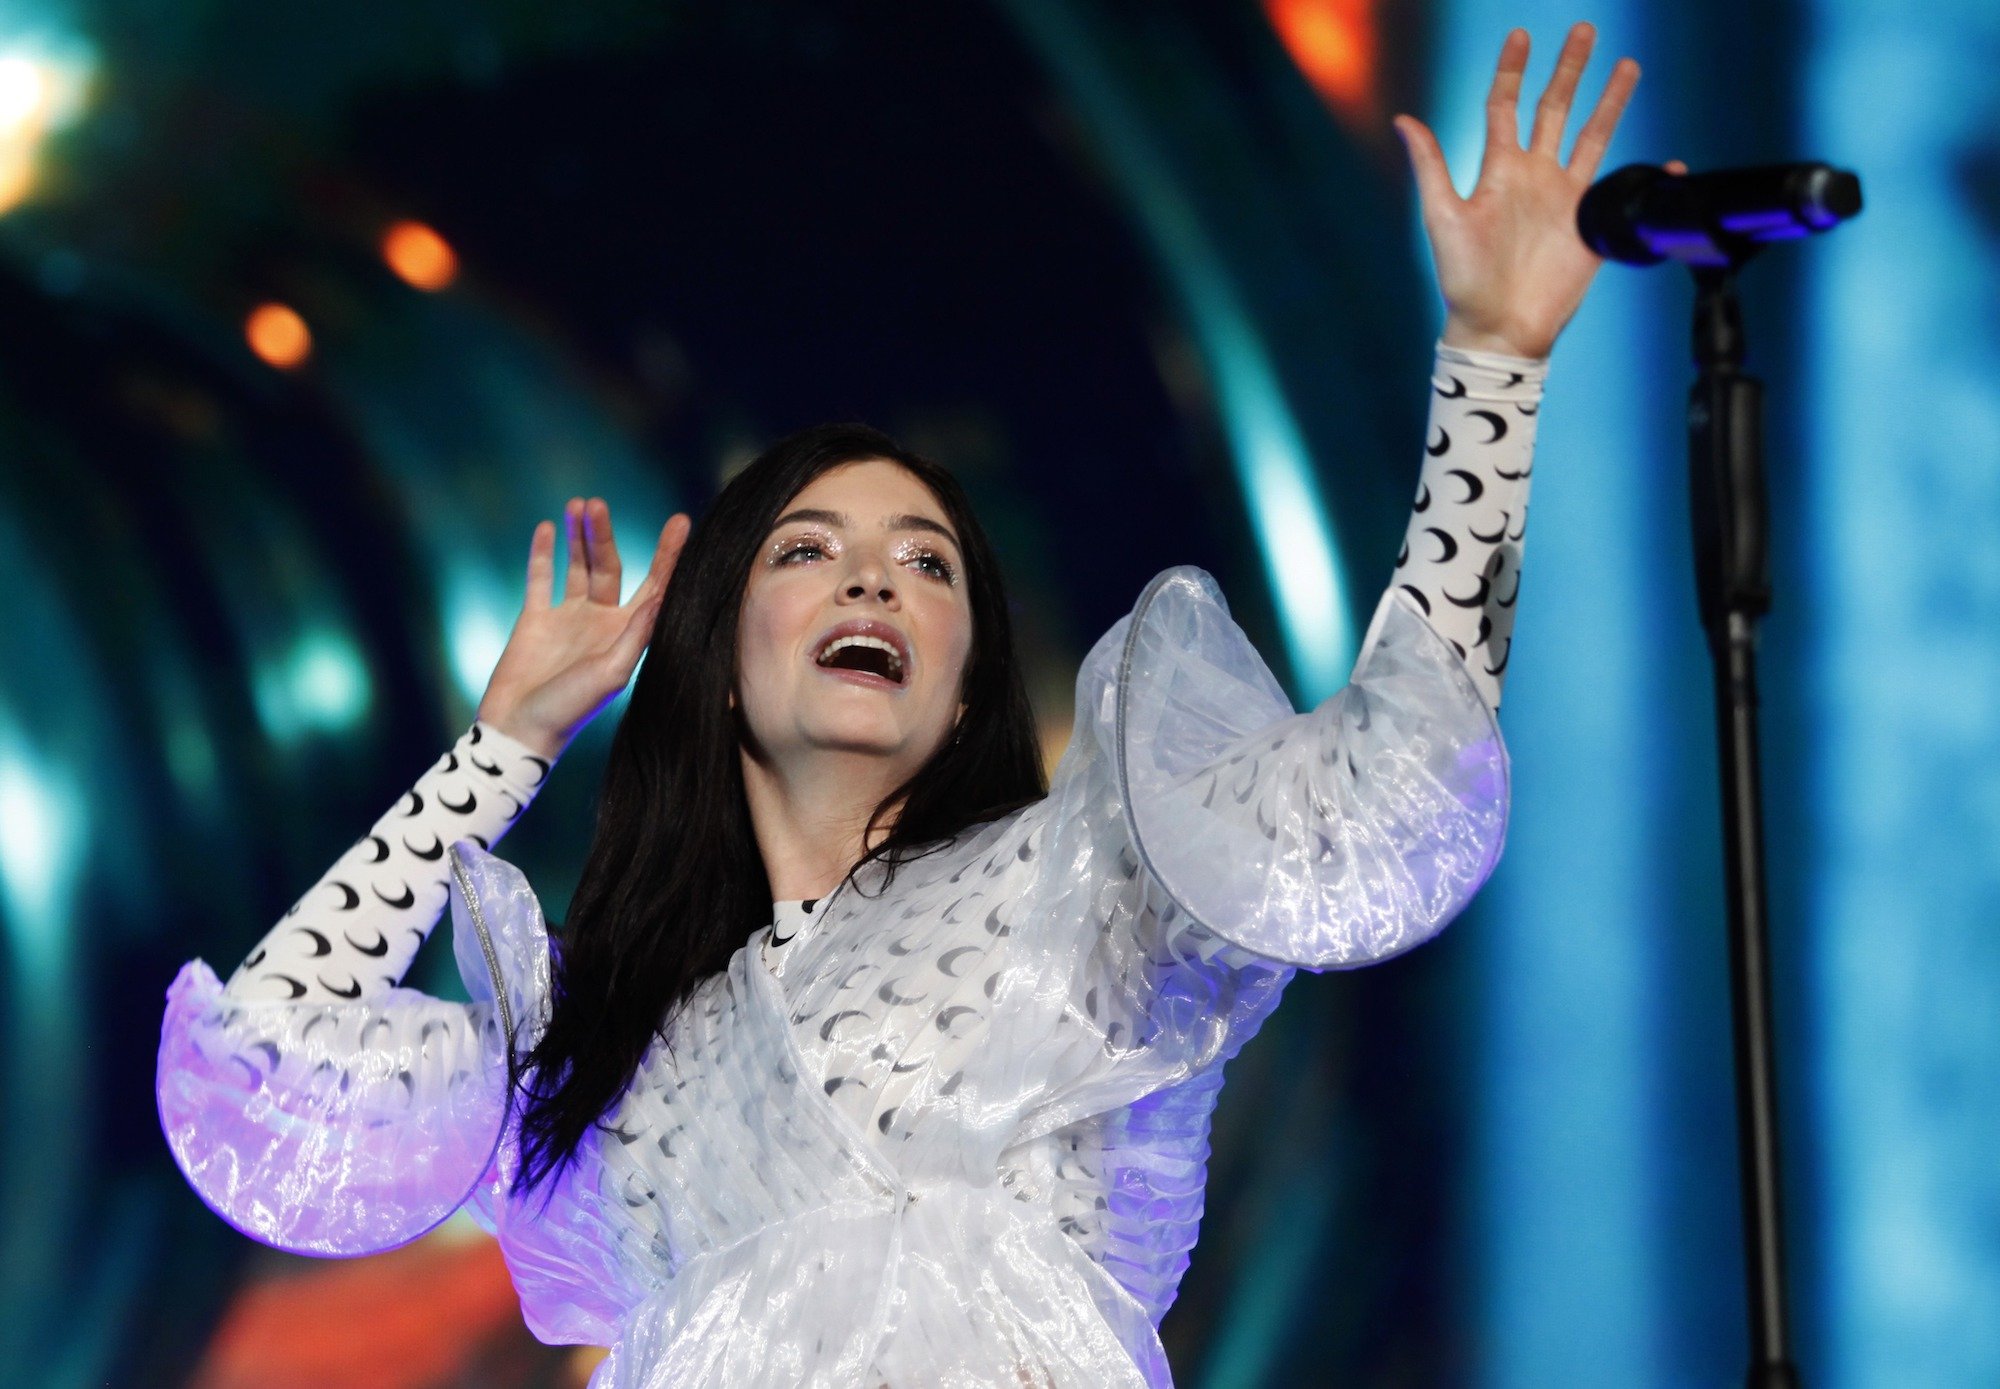 Lorde’s ‘Solar Power’ Gives off a Cult Energy and ‘Midsommar’ Comparisons Are Hard to Unsee